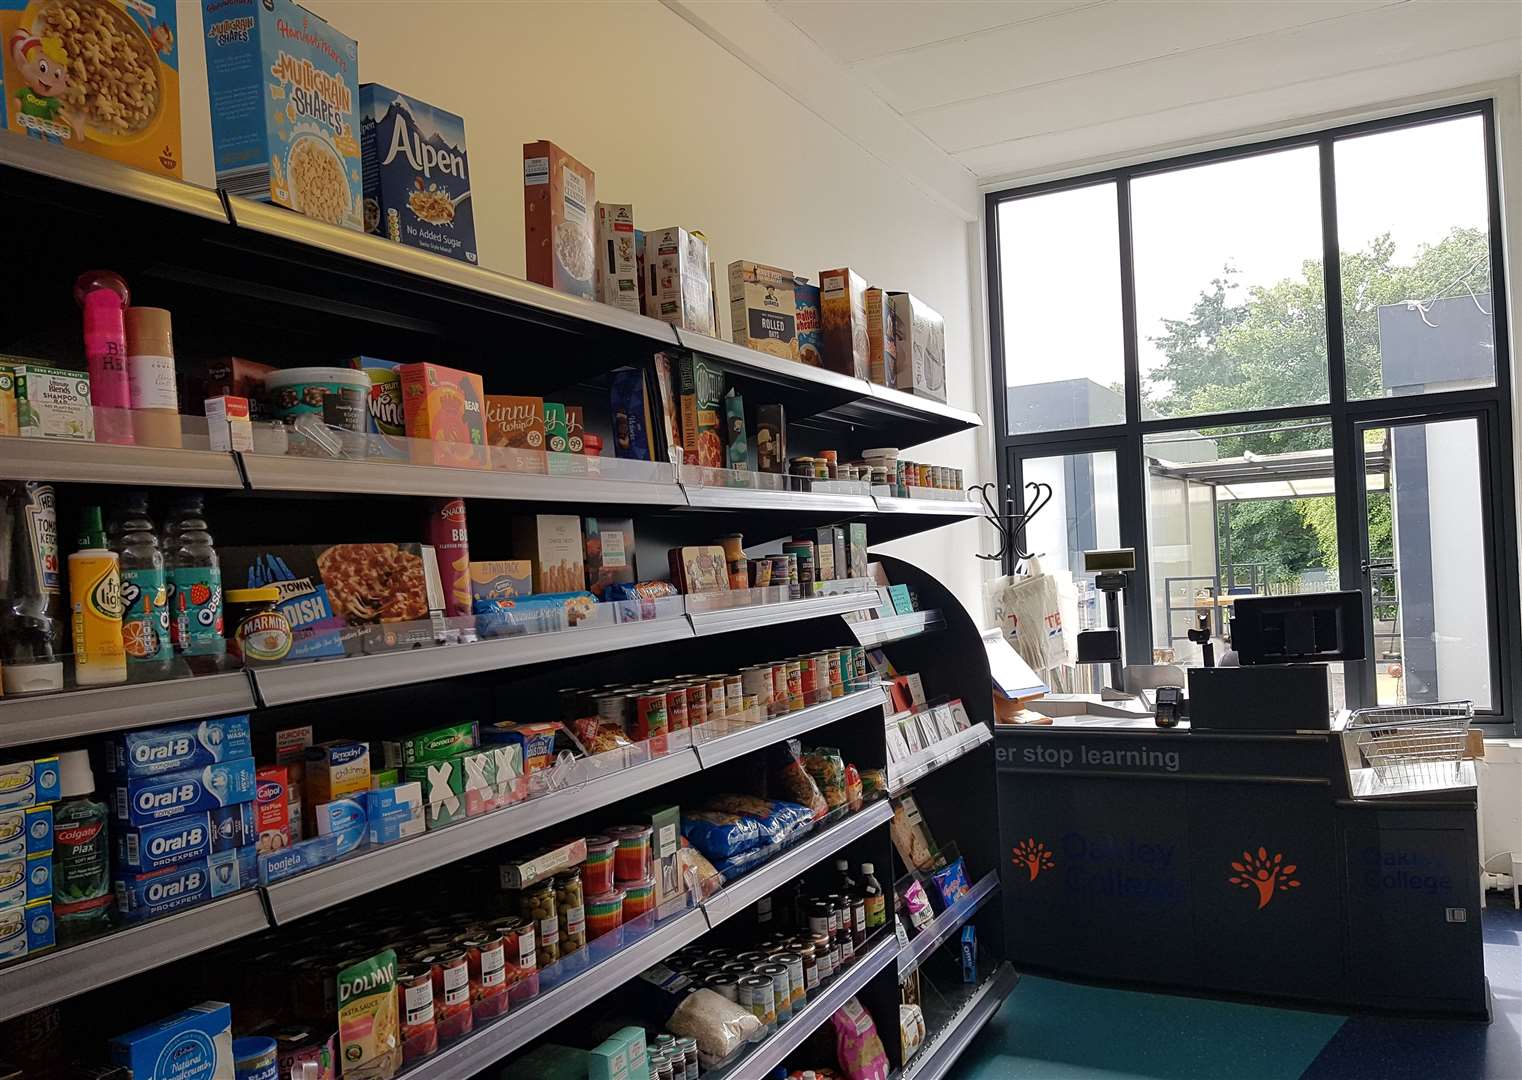 A Tesco store selling groceries and items hand made by learners has opened in Oakley College